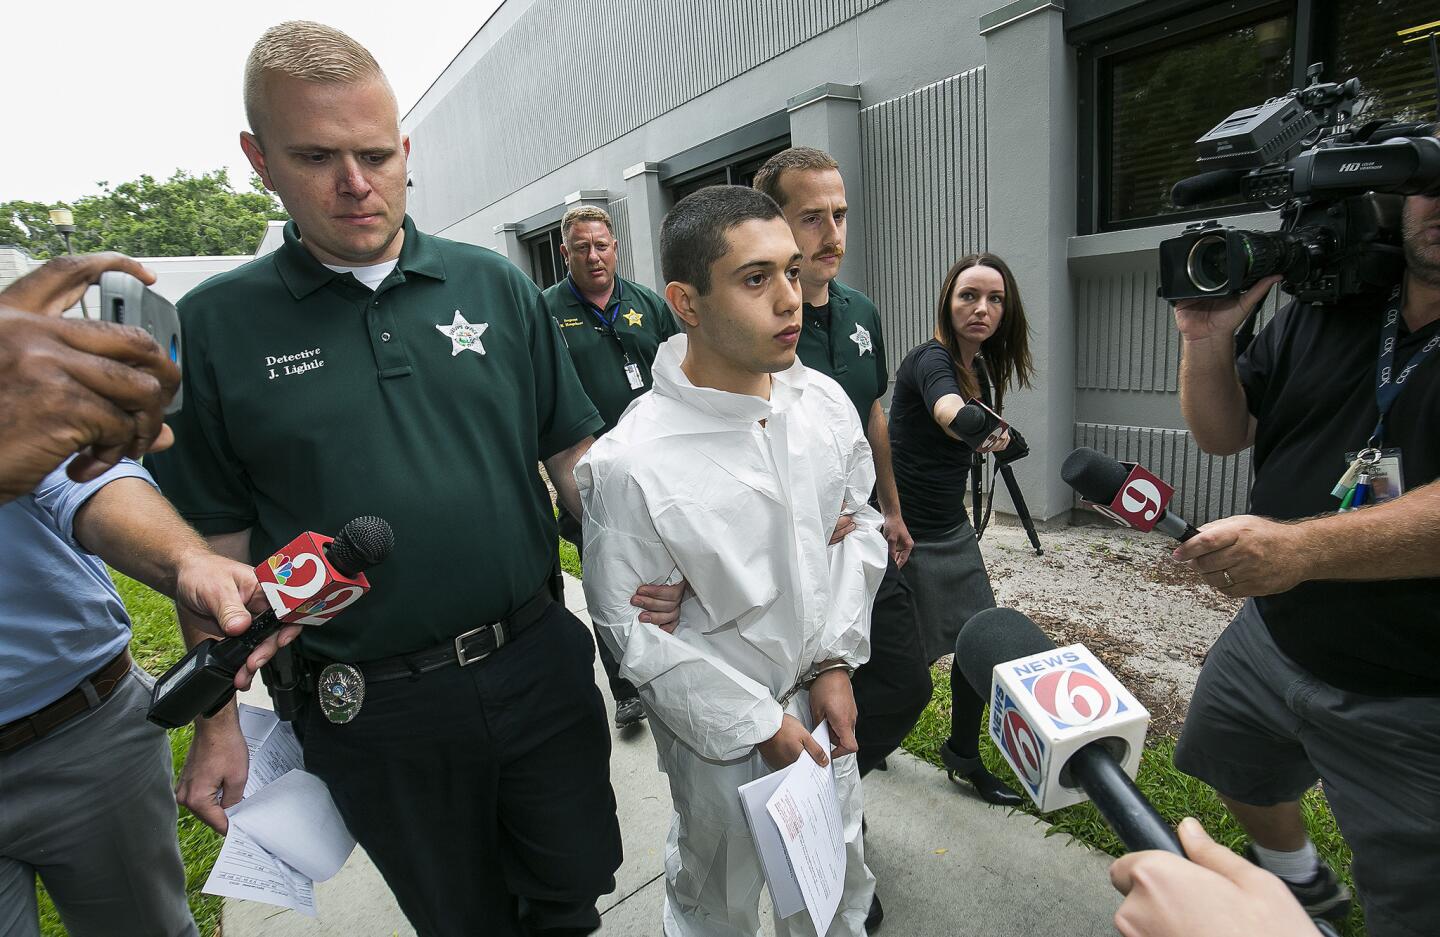 Marion County Sheriff's Detectives John Lightle, left, and Dan Pinder, right, escort a handcuffed and shackled Sky Bouche, 19, center, to a waiting patrol car, April 20, 2018, in Ocala, Fla. Bouche is the suspect in a shooting that occurred at Forest High School Friday morning.